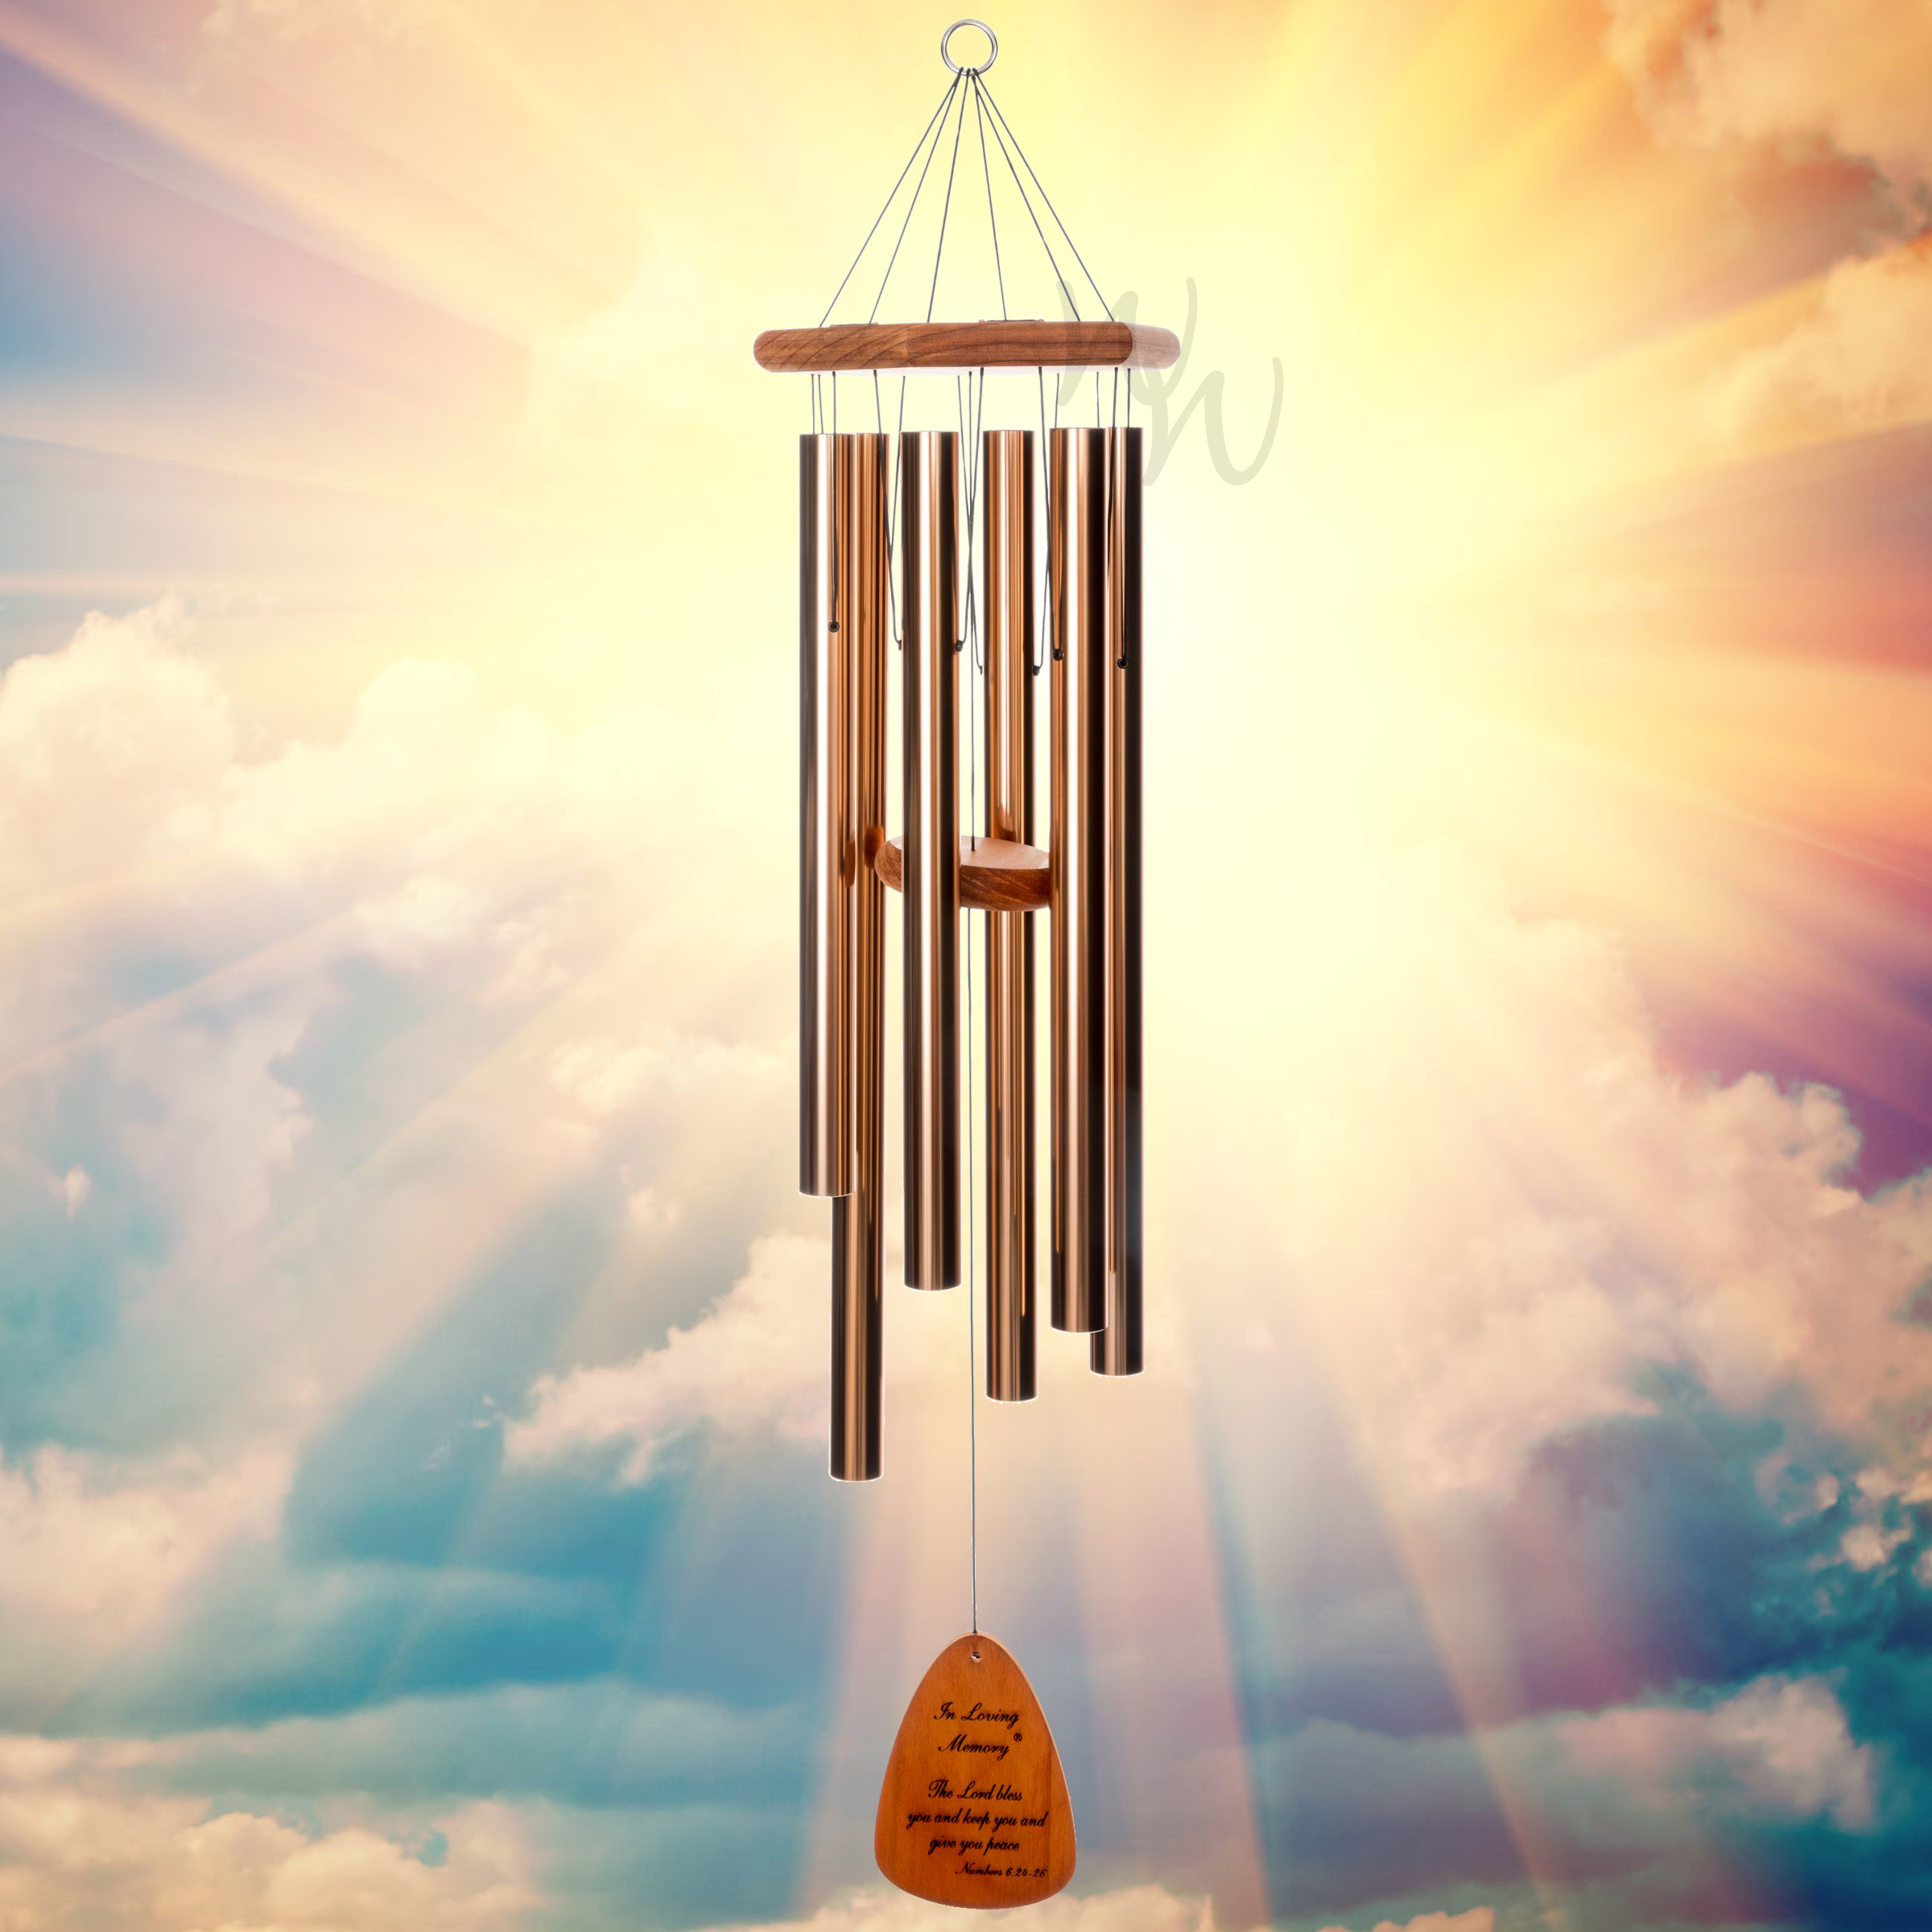 In Loving Memory 42 Inch Windchime - The Lord bless you... in Bronze